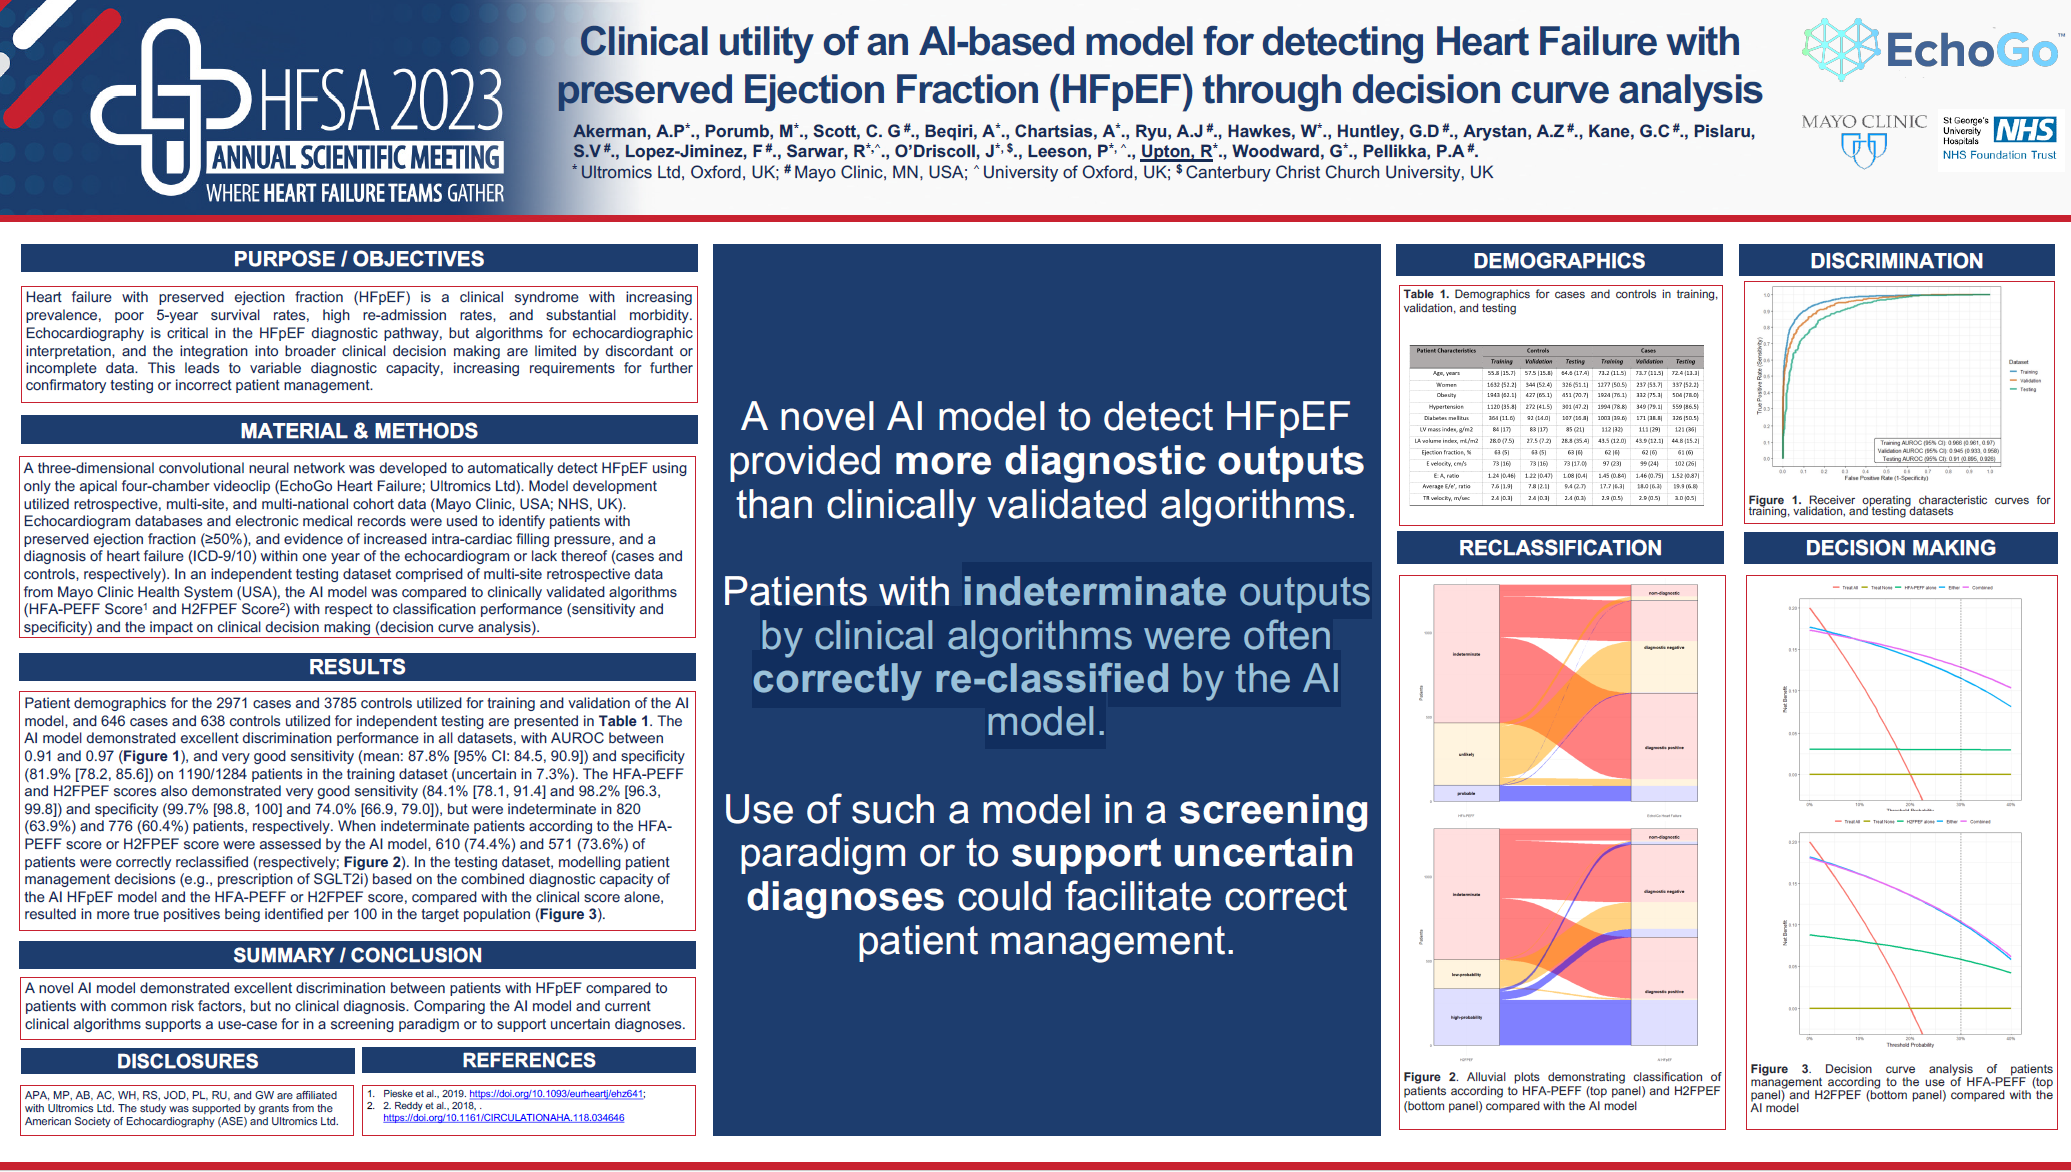 Clinical Utility of An AI-Based Model For Detection of Heart Failure With Preserved Ejection Fraction Using Decision Curve Analysis